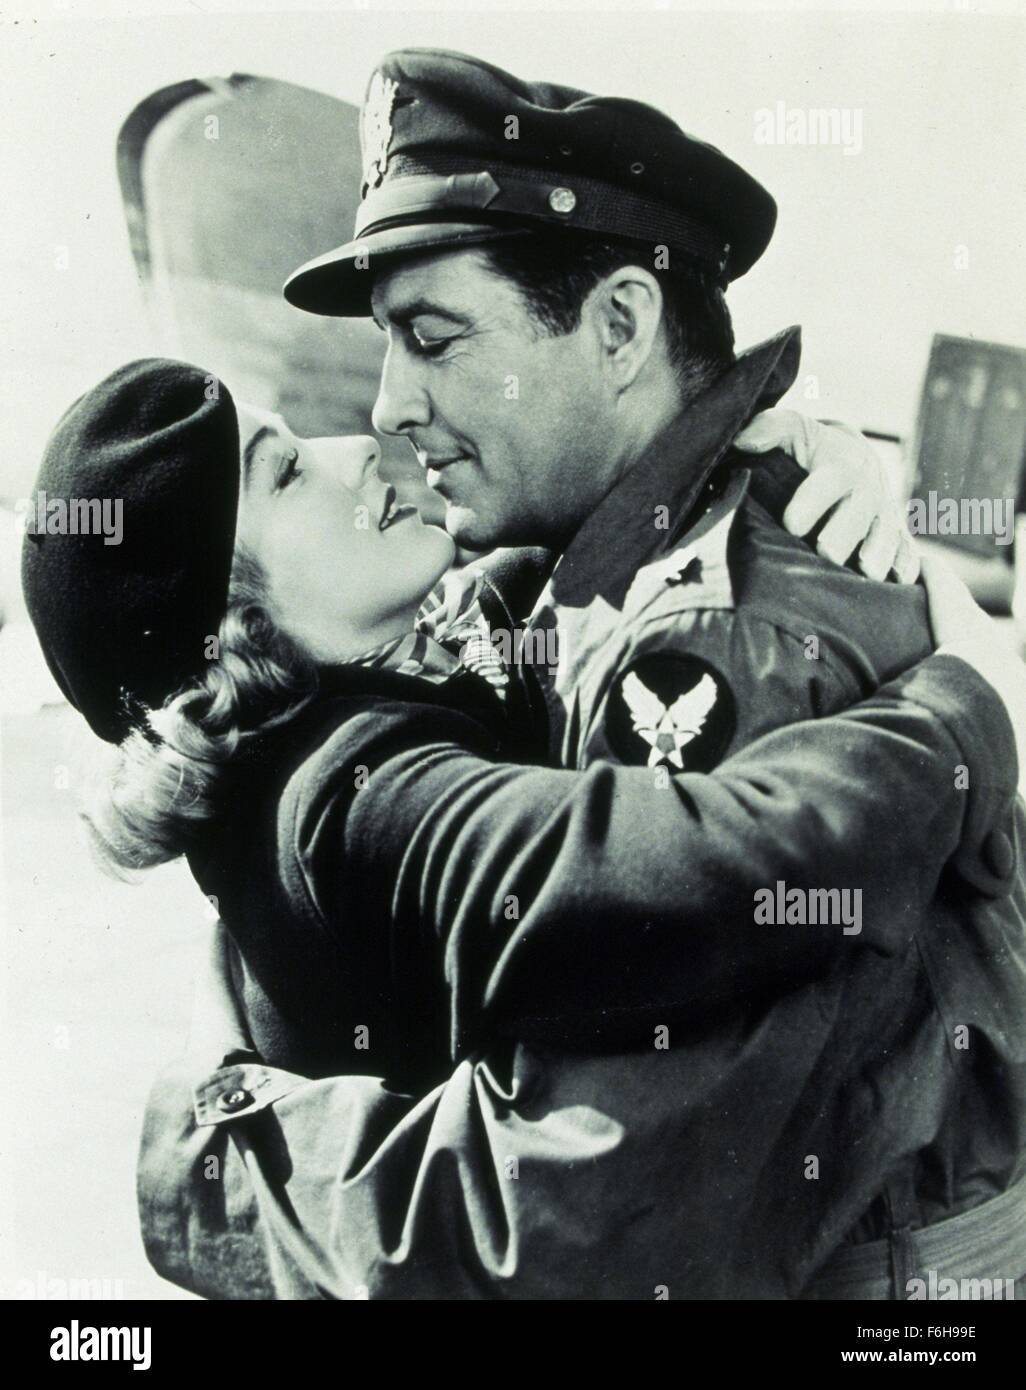 1952, Film Title: ABOVE AND BEYOND, Director: NORMAN PANAMA, Studio: MGM, Pictured: BIOGRAPHY, CHARACTER, DRAMA, NORMAN PANAMA, ELEANOR PARKER, PAUL TIBBETS: DROPPEDA BOMB, ROMANCE, ROBERT TAYLOR. (Credit Image: SNAP) Stock Photo